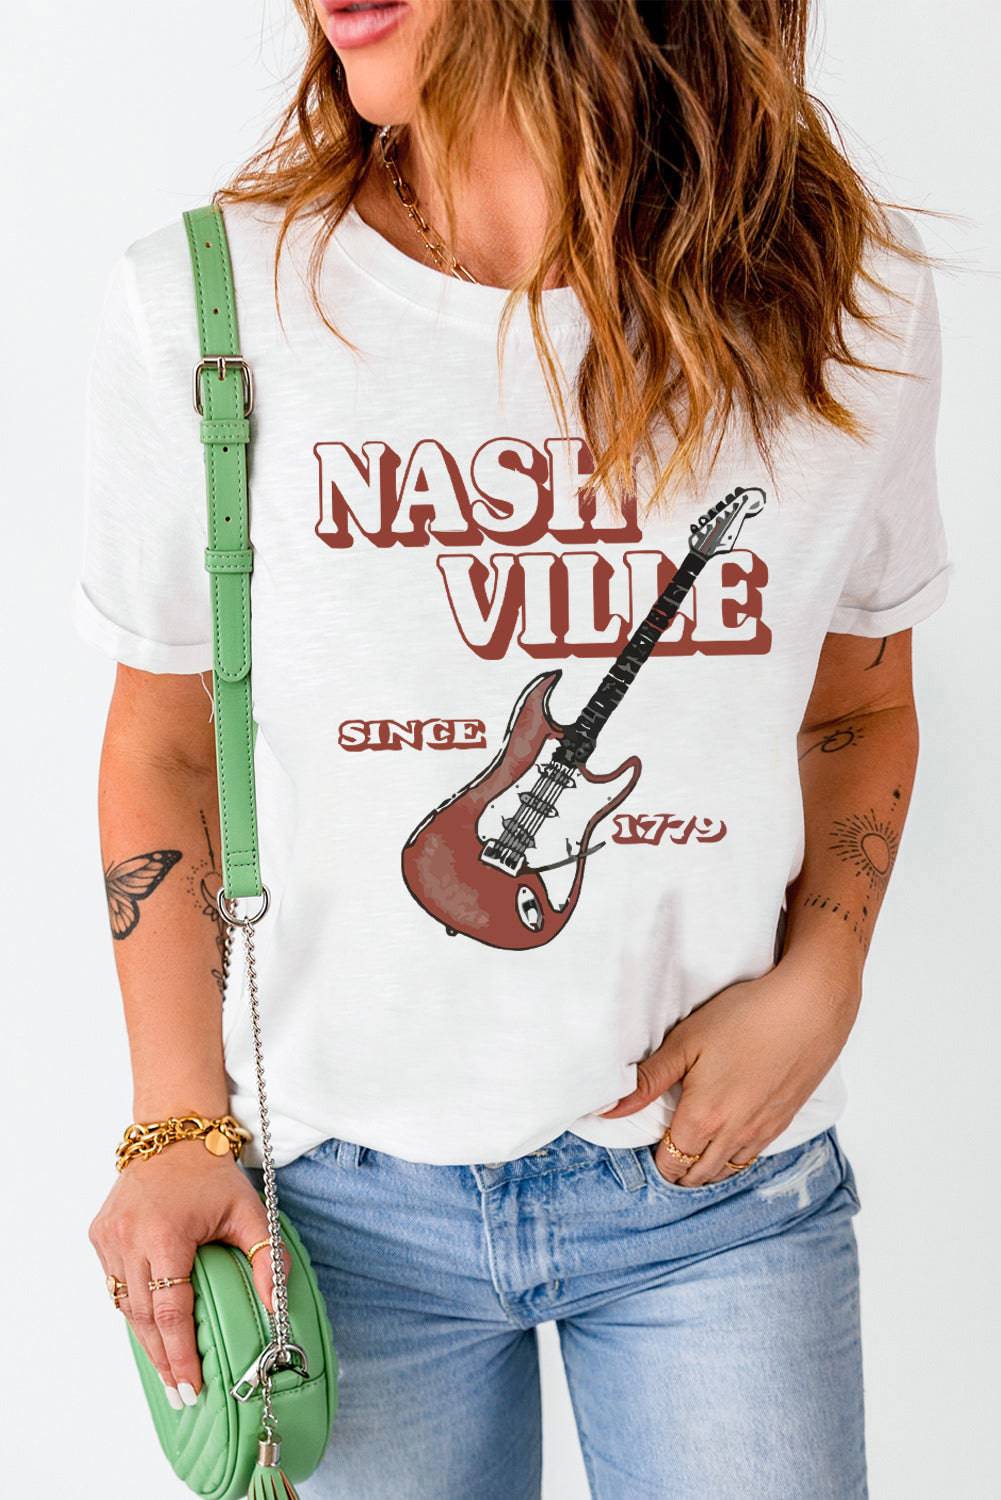 "Nashville since 1779 Graphic Tee - A Love Letter to Nashville's Beauty - Embrace Timeless Style and Comfort". - Guy Christopher